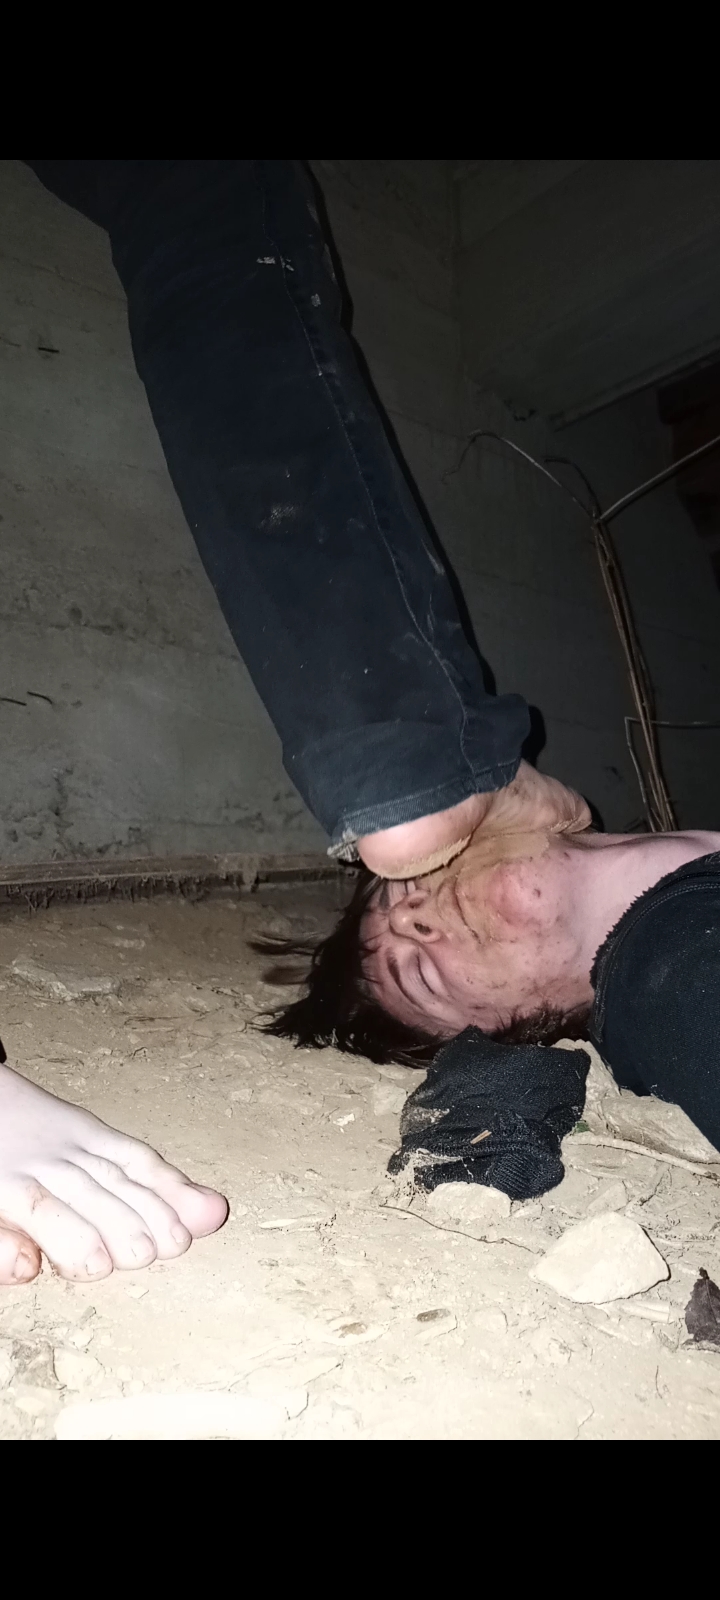 Slave cleans Masters feet in filthy mausoleum crawlspac